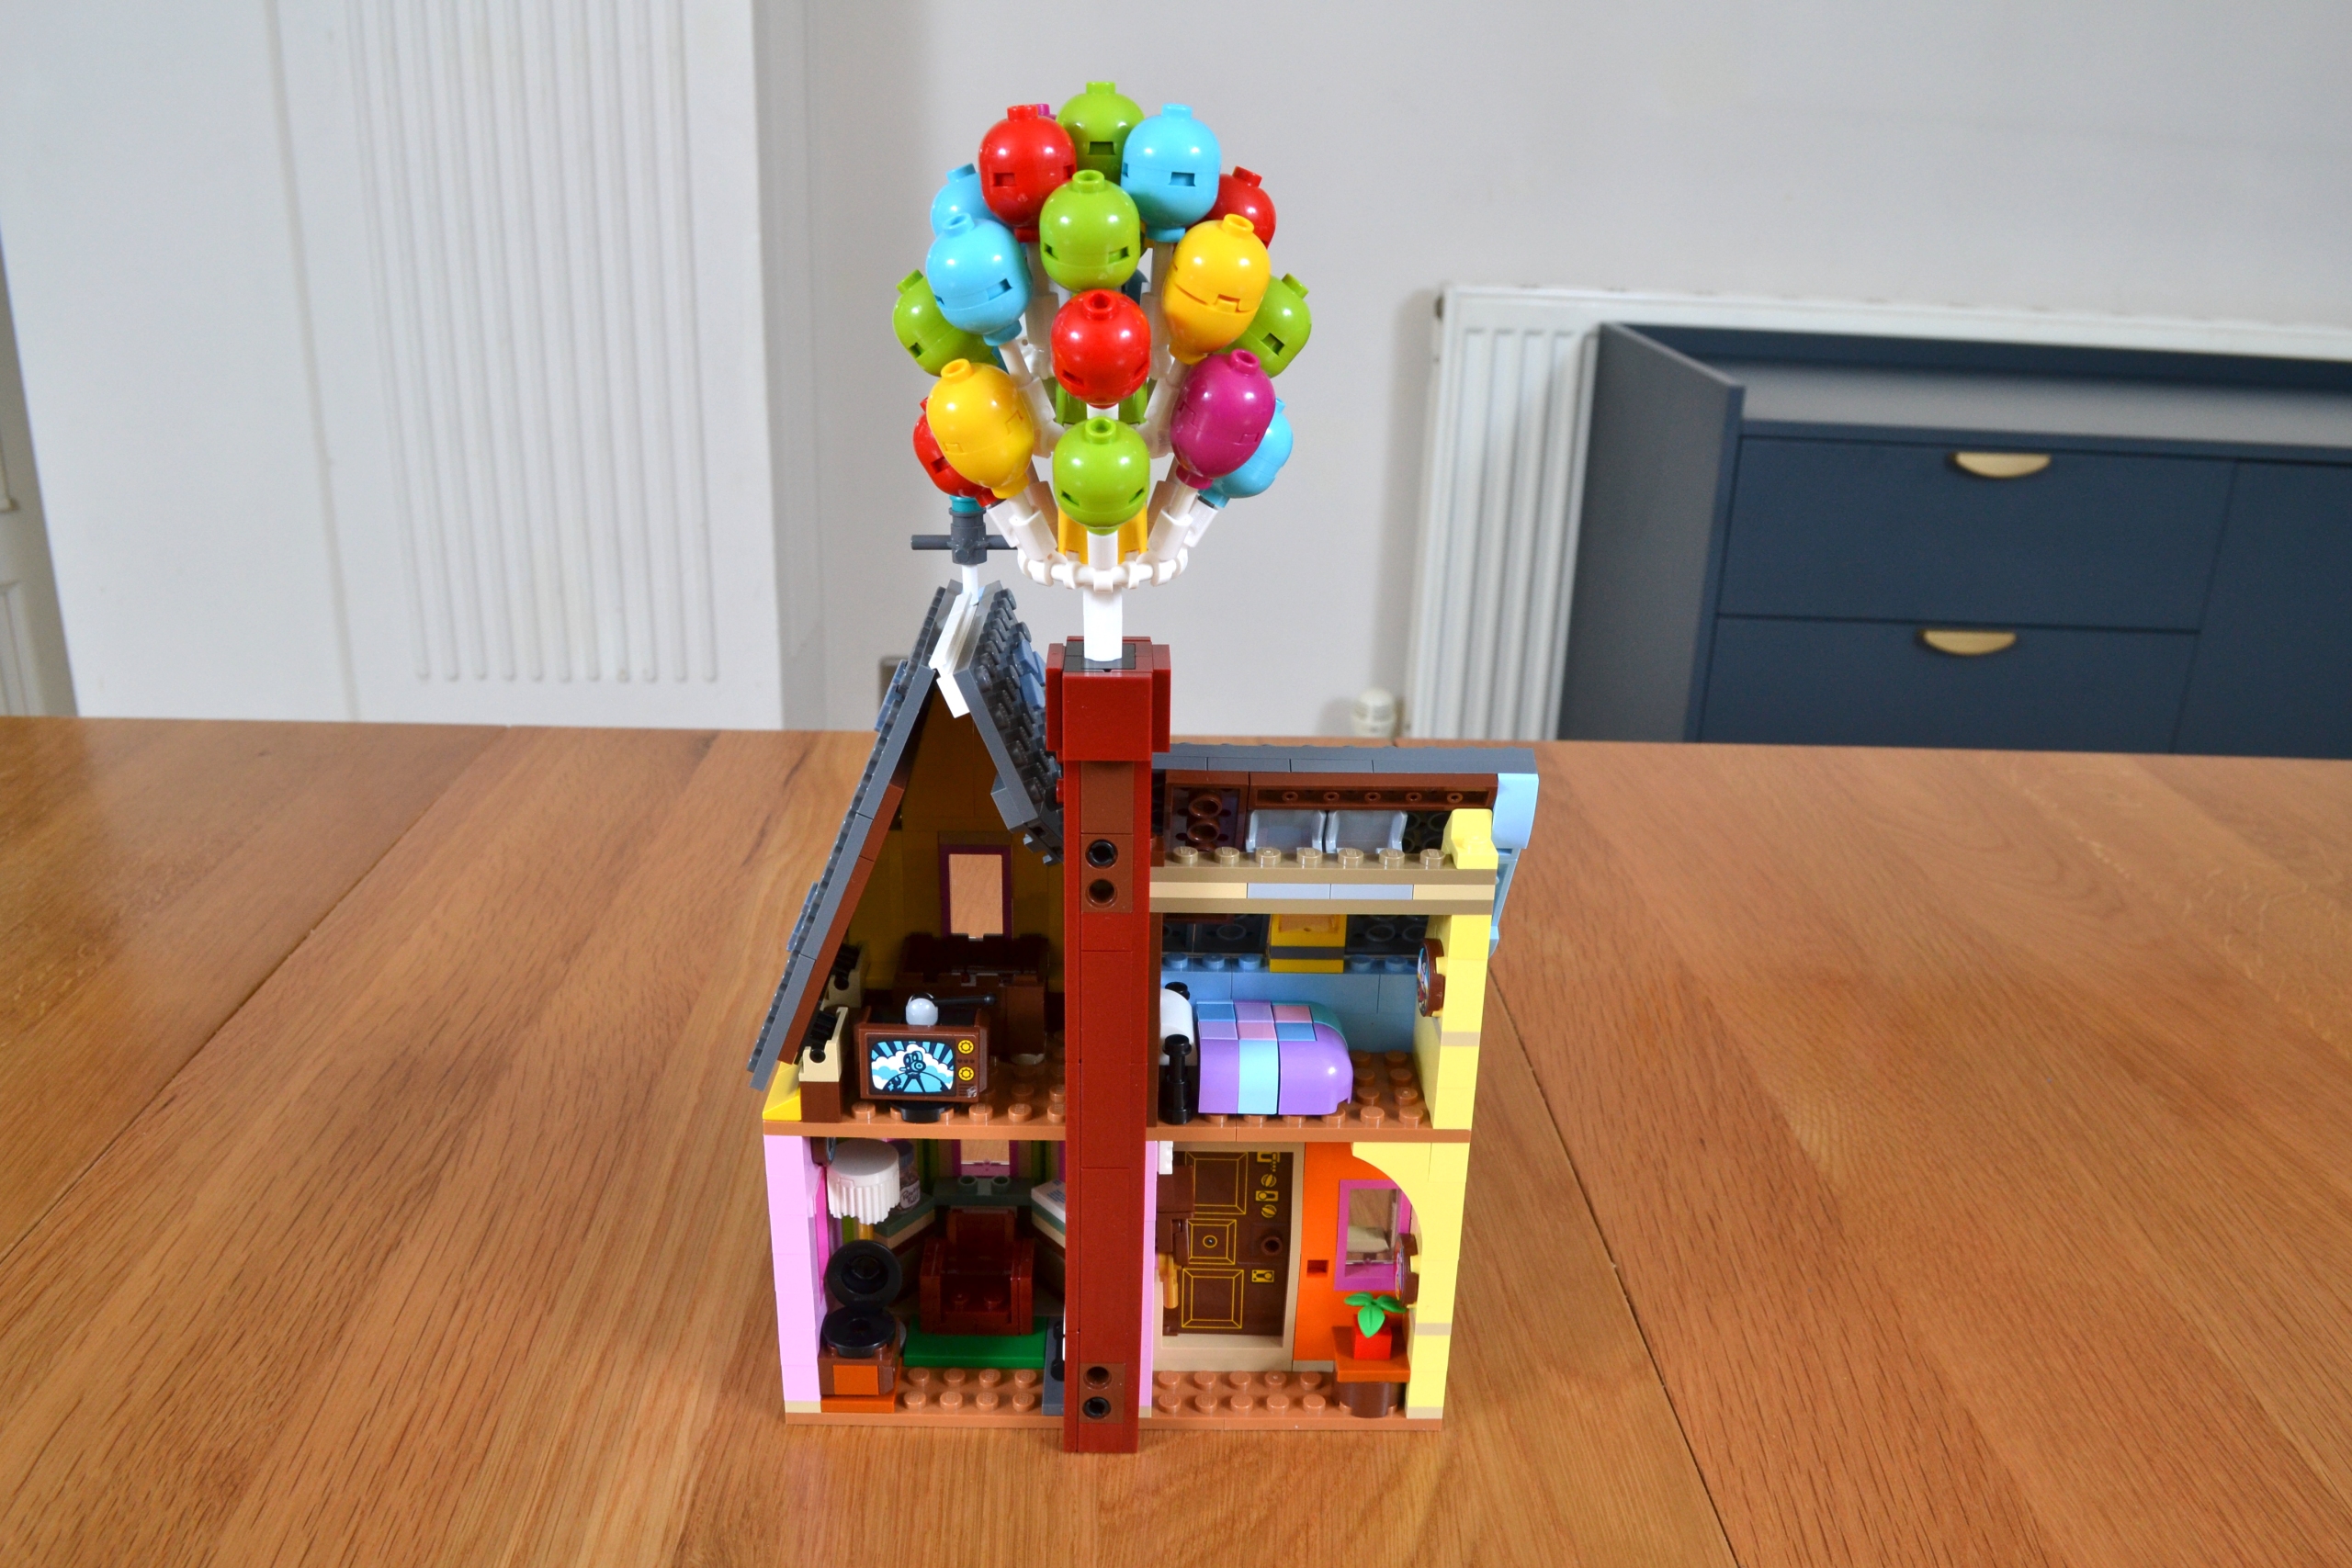 LEGO IDEAS - Pixar's Up House With Balloons